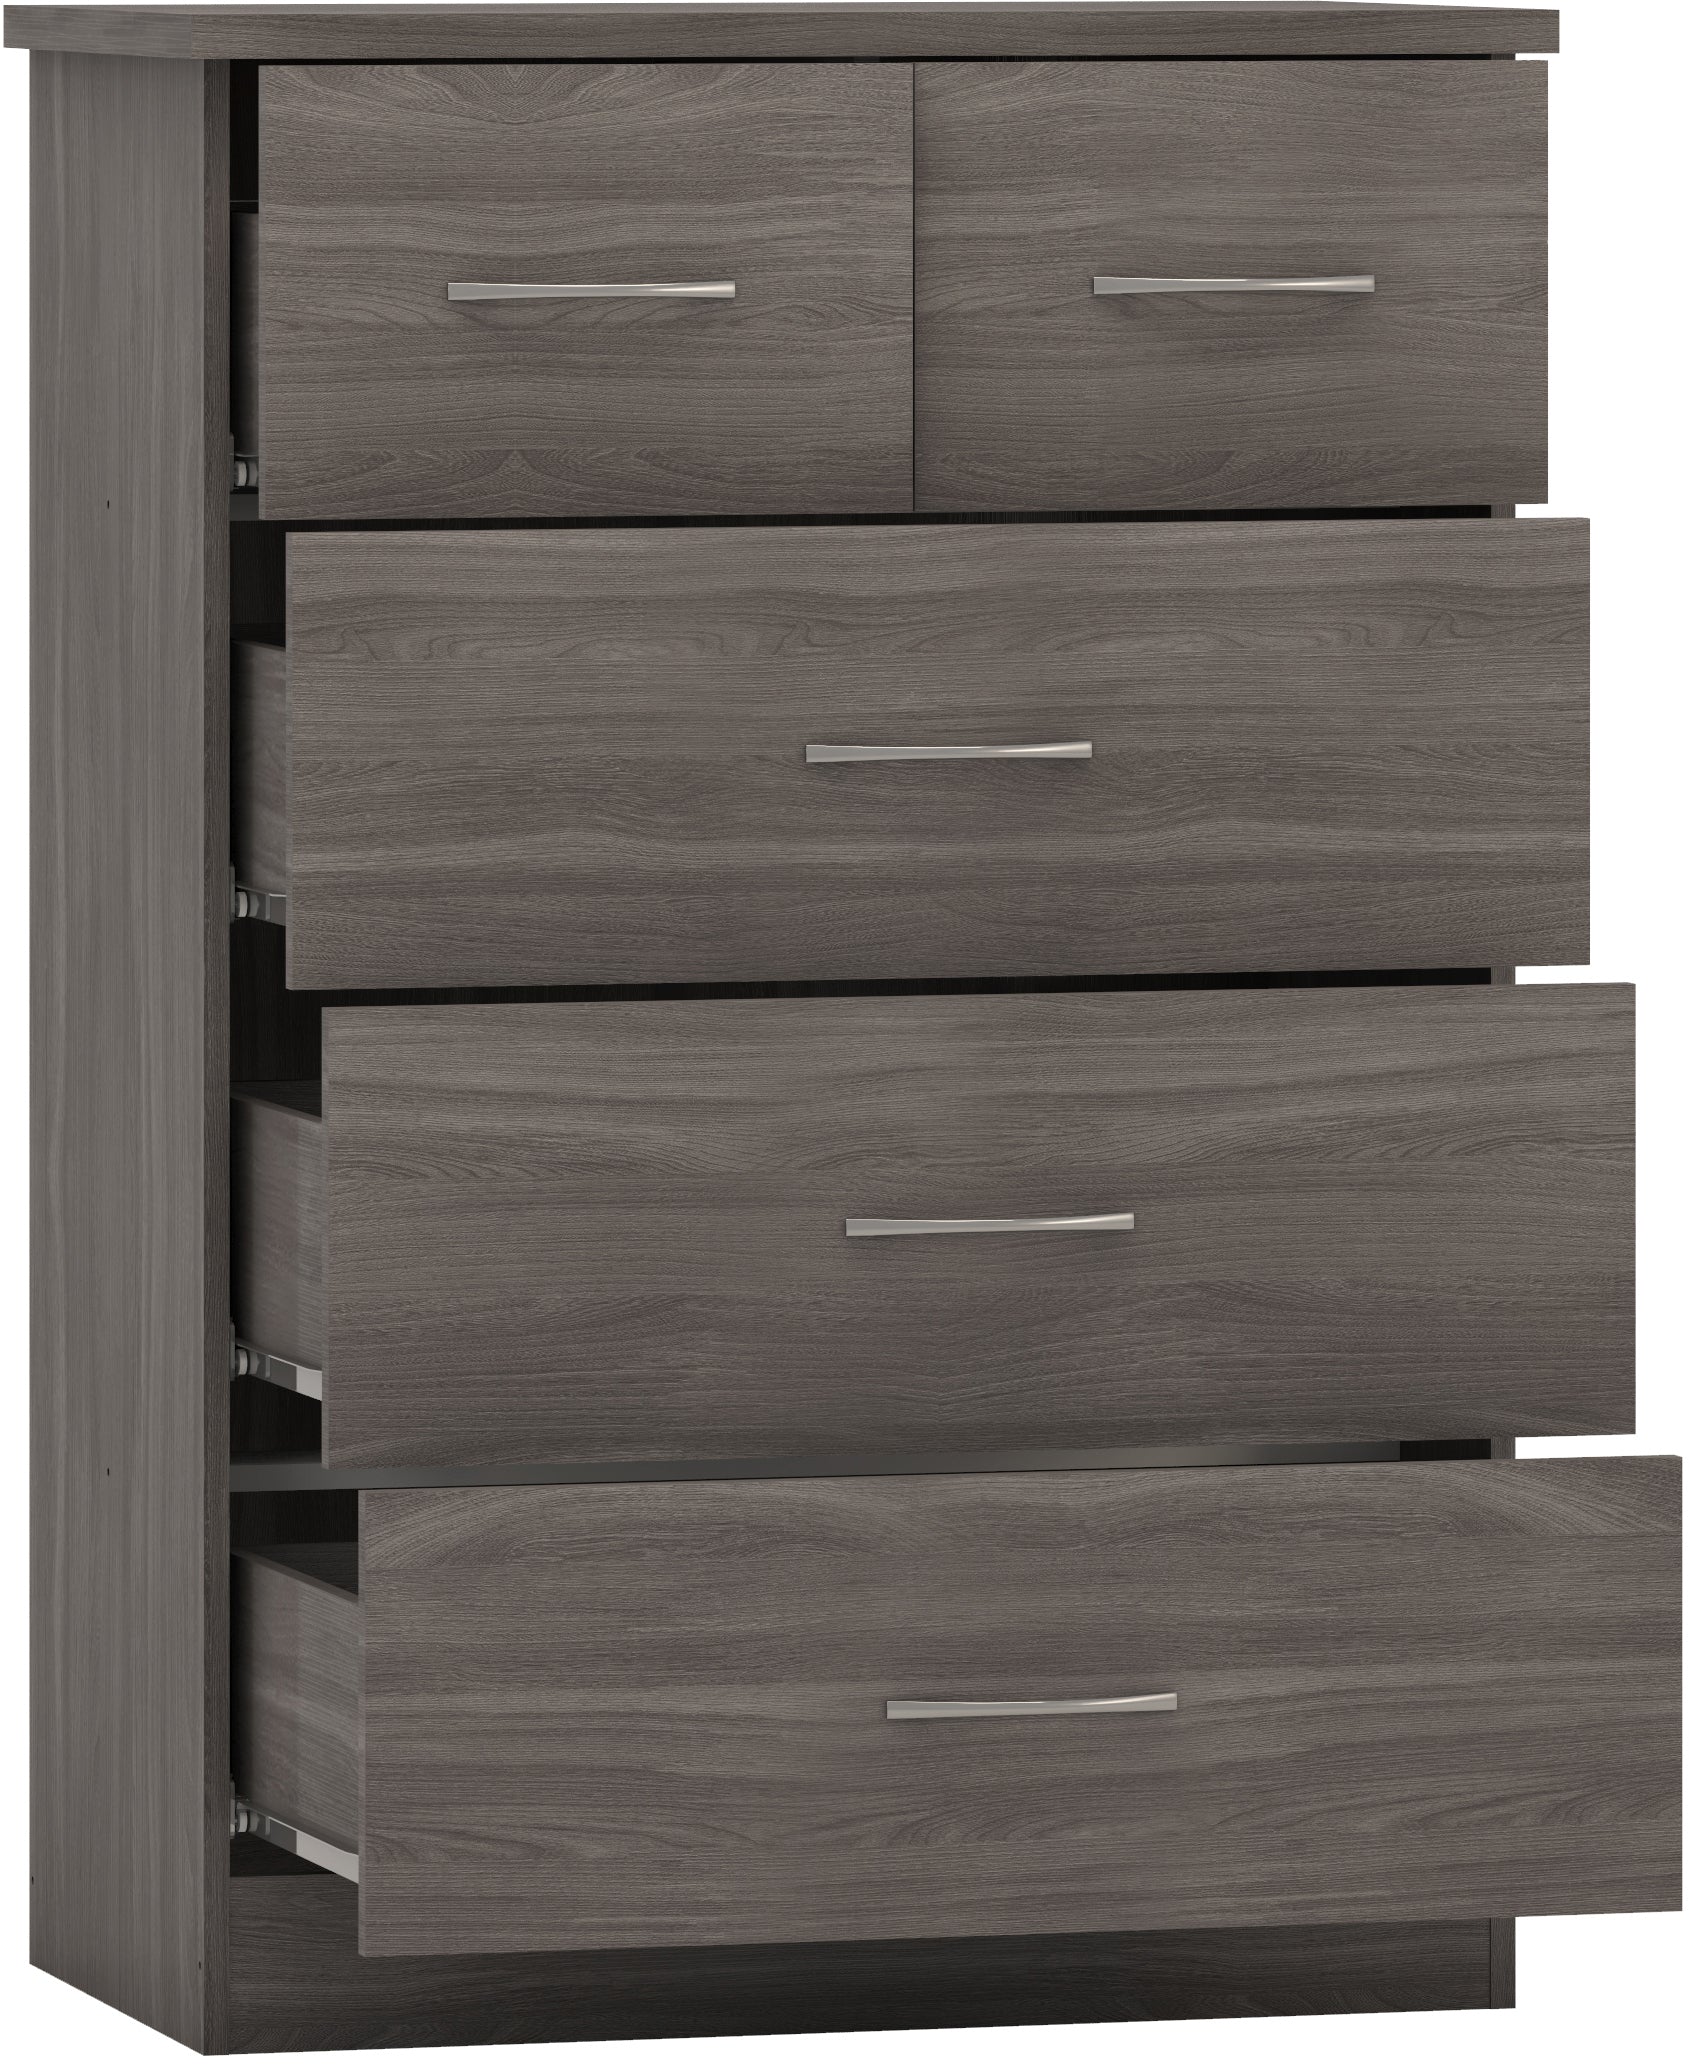 black wood grain chest of drawers